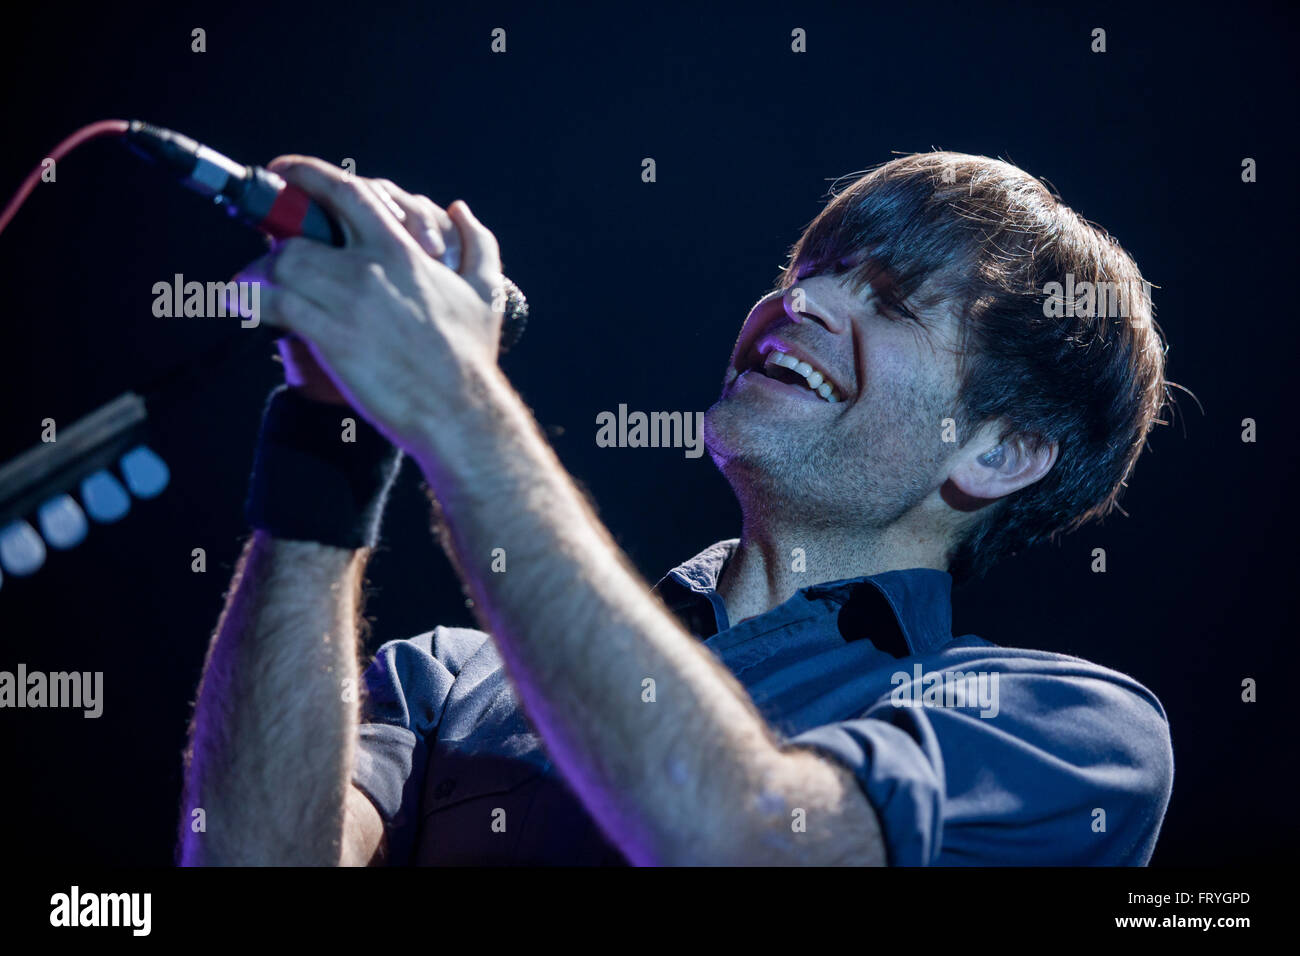 London, Ontario, Canada. 24th March, 2016. The American indie rock band Death Cab For Cutie takes the stage for a concert performance. Credit:  Mark Spowart/Alamy Live News Stock Photo